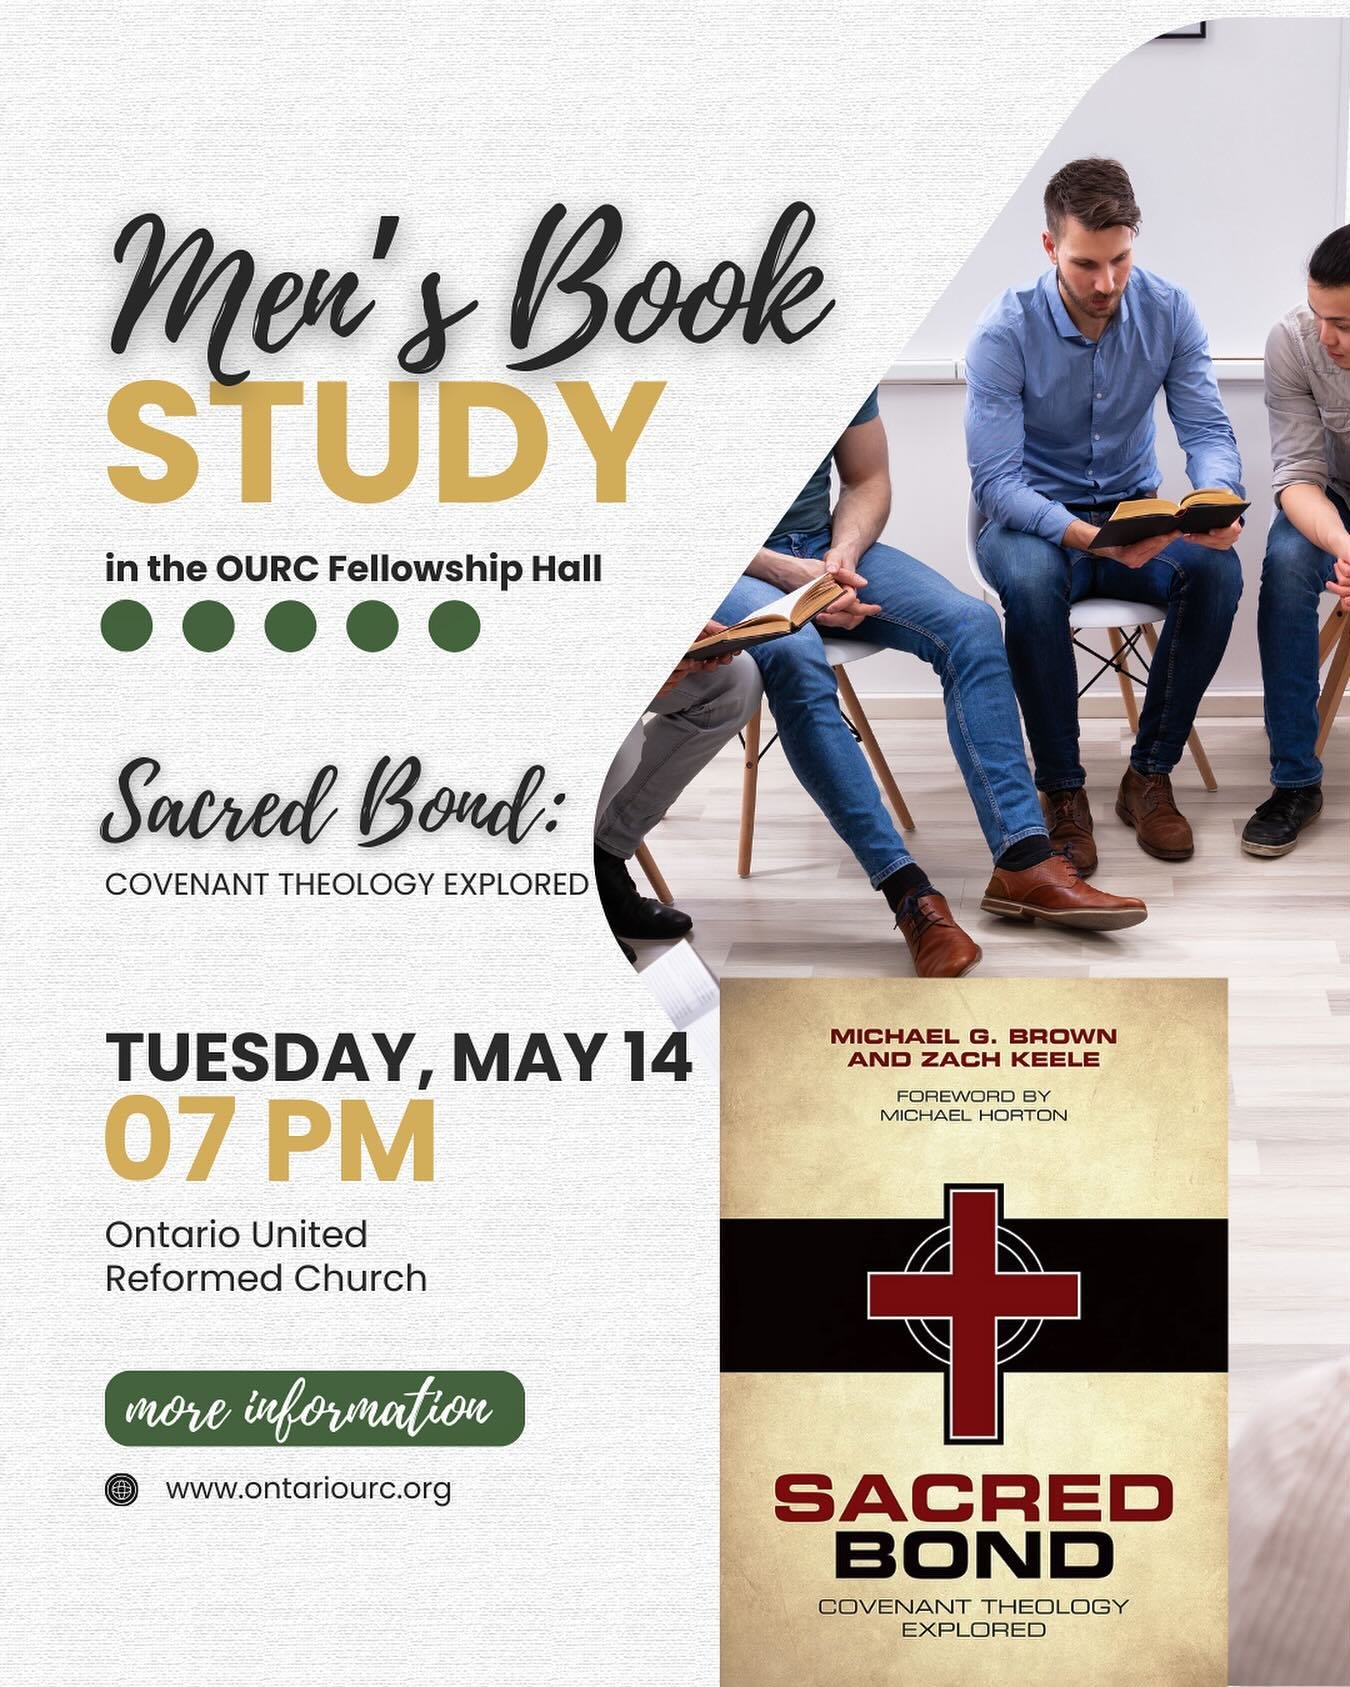 We&rsquo;re reading Chapter 8 of &lsquo;Sacred Bond&rsquo; this Tuesday&mdash;the drinks will be cold, the snacks will be salty, and the fellowship will be edifying, so stop by!